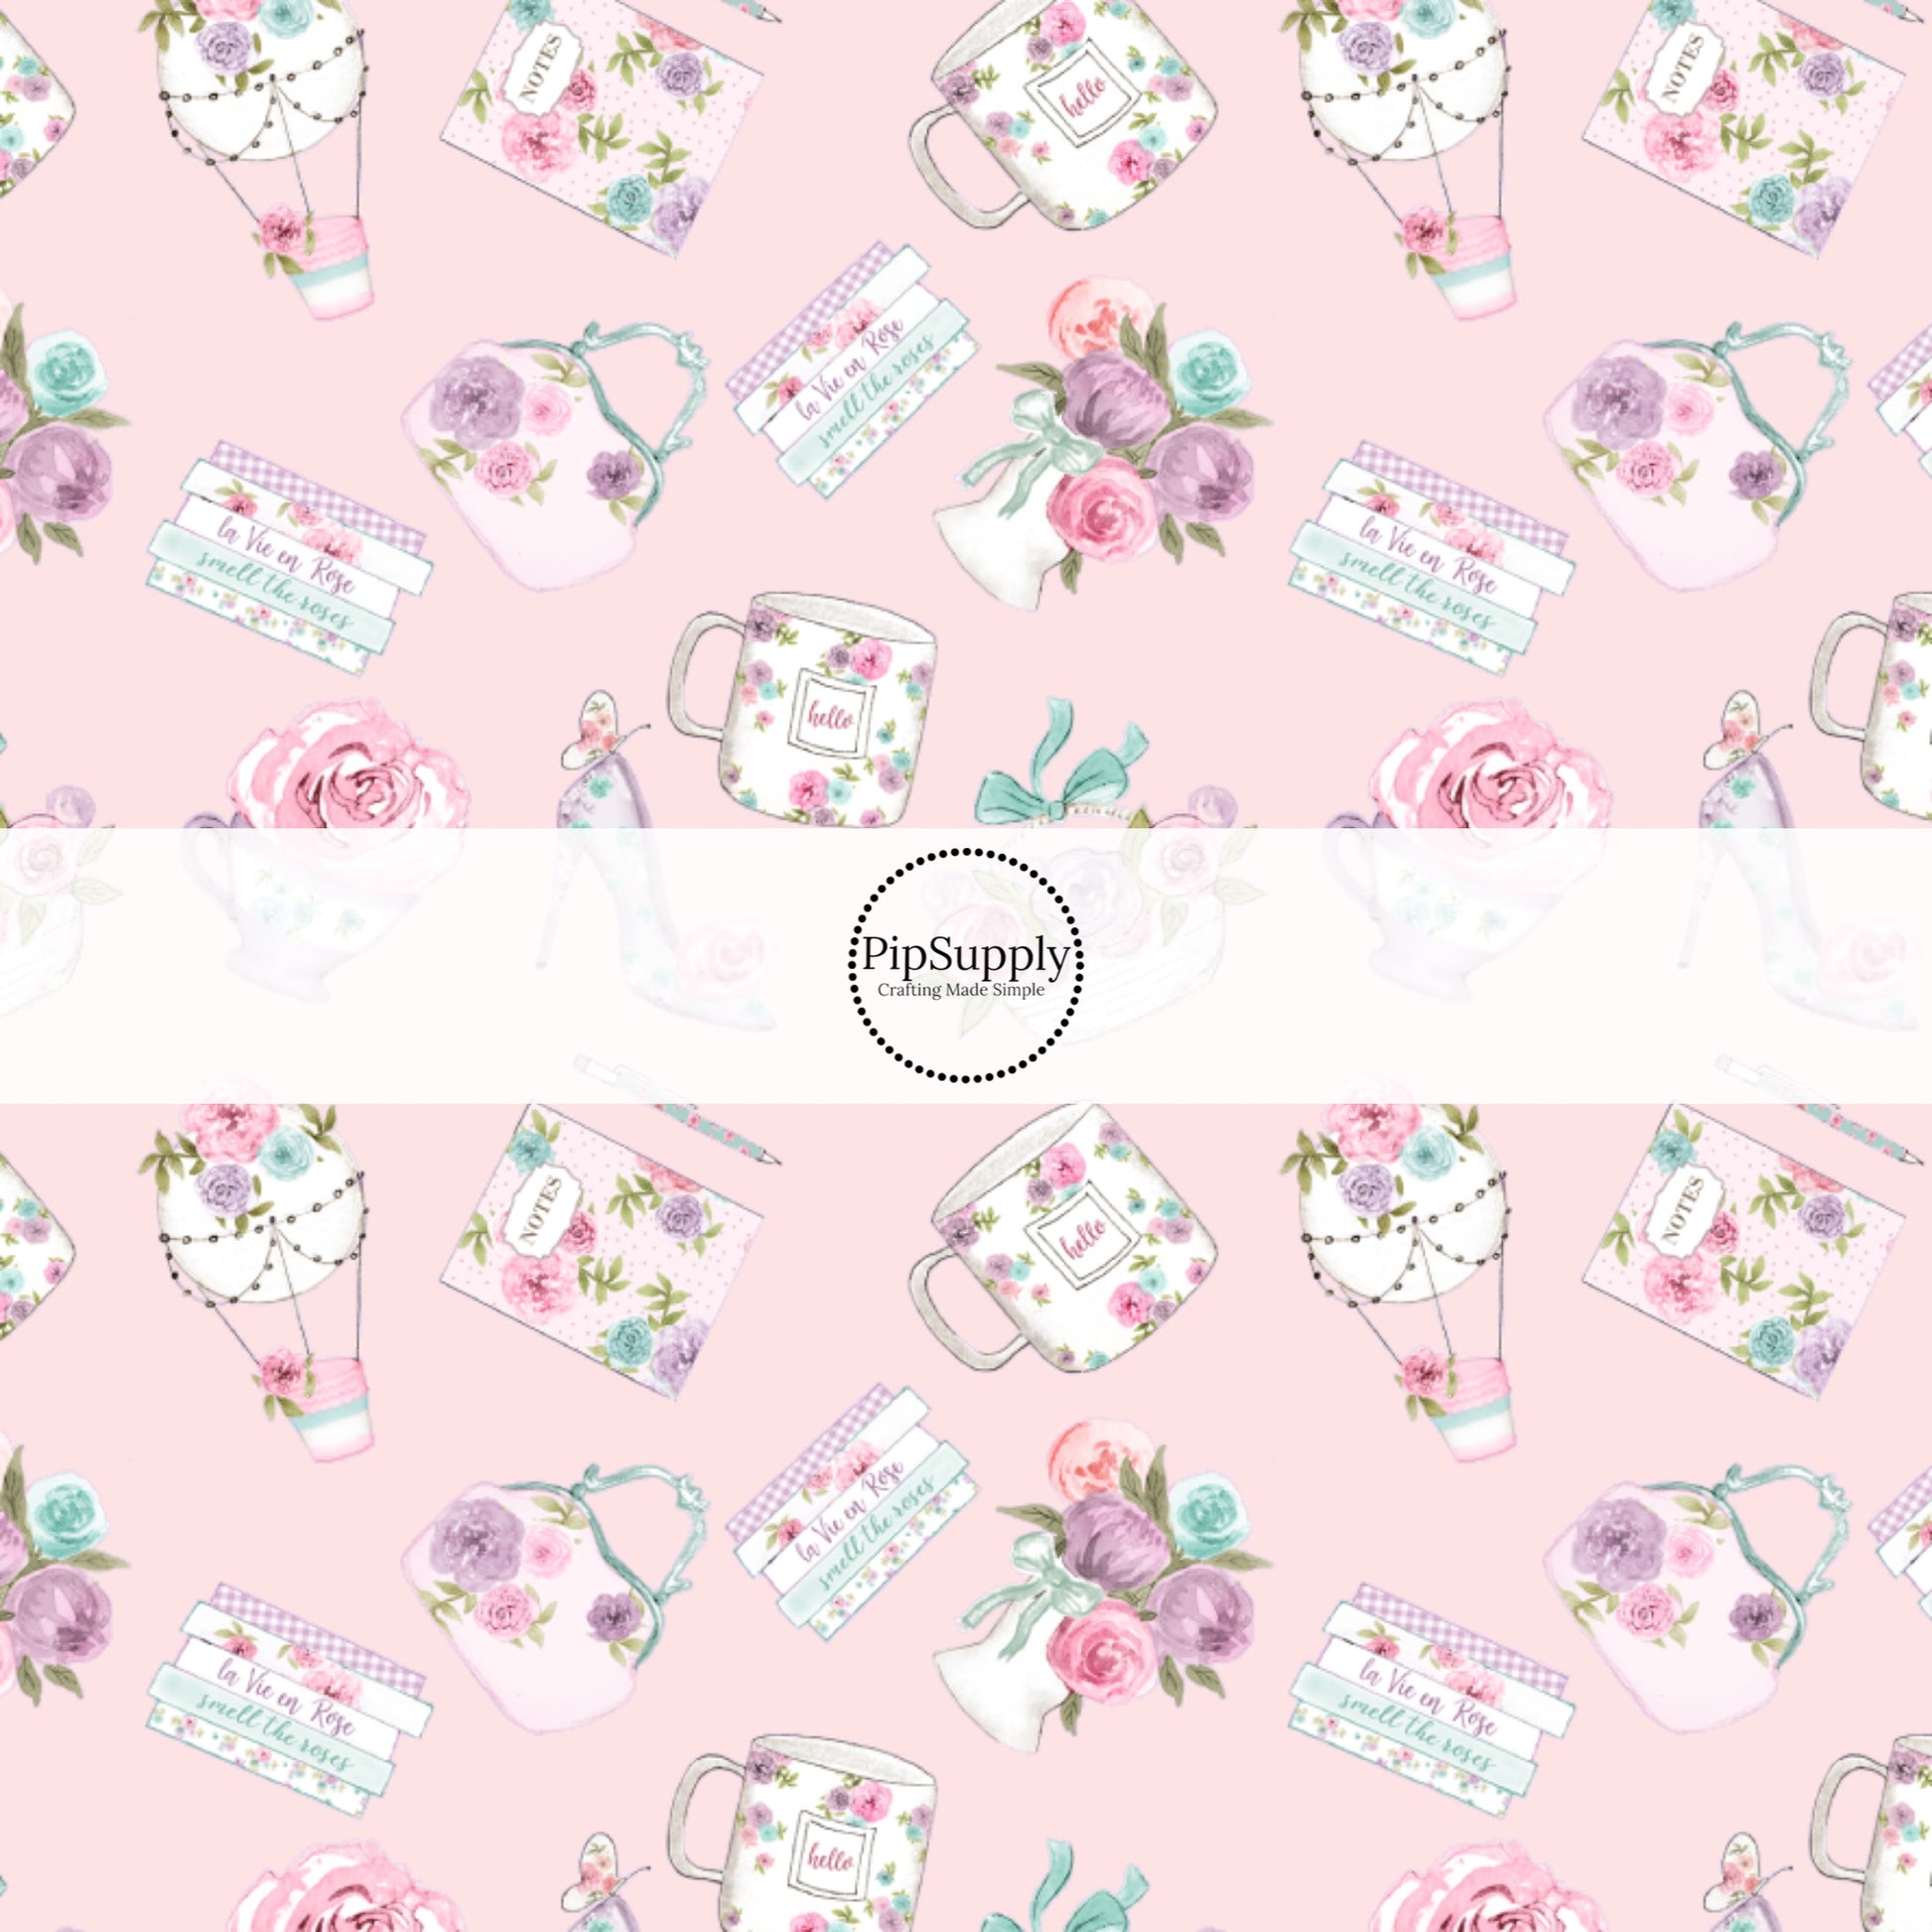 This summer fabric by the yard features multi colored roses, tea cups, and tea pots on light pink. This fun summer themed fabric can be used for all your sewing and crafting needs!